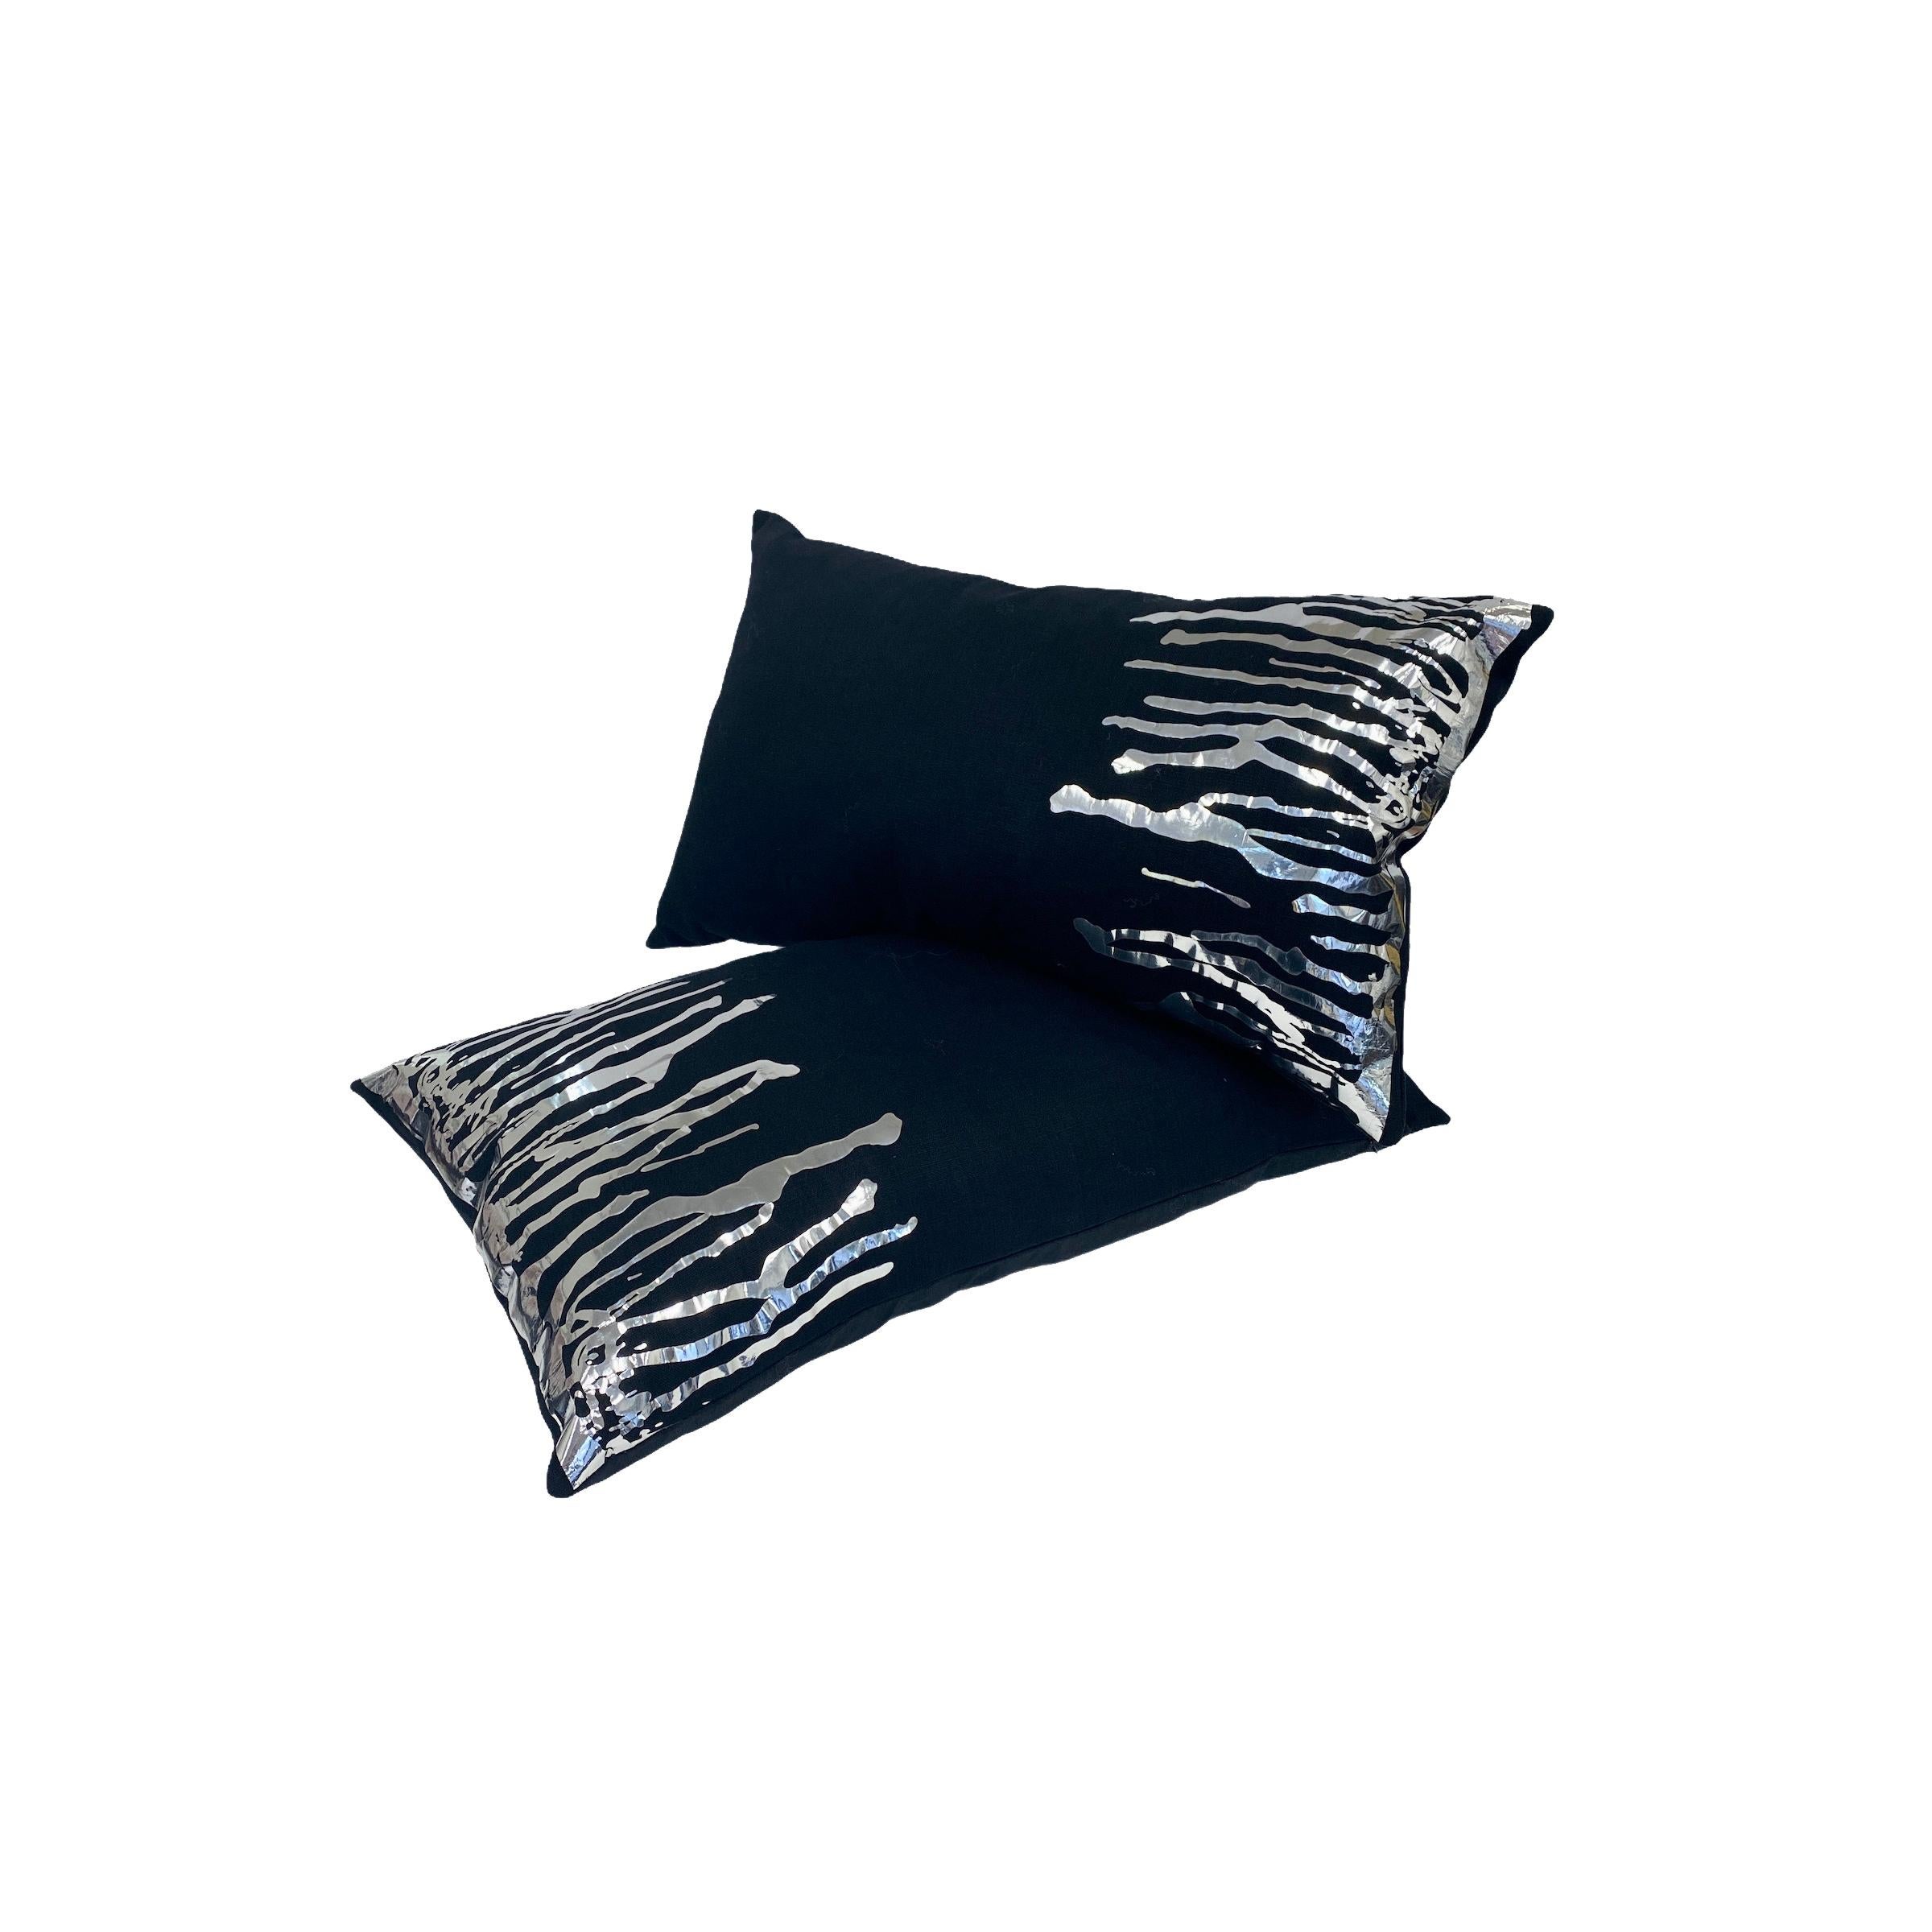 100% Belgian natural linen decorative pillow with silver rain drop motif. Composed of very soft linen. Midnight black and silver combo. This pillow was dreamt up by our in-house design studio in Manhattan. Design inspired by rain drop runoff.